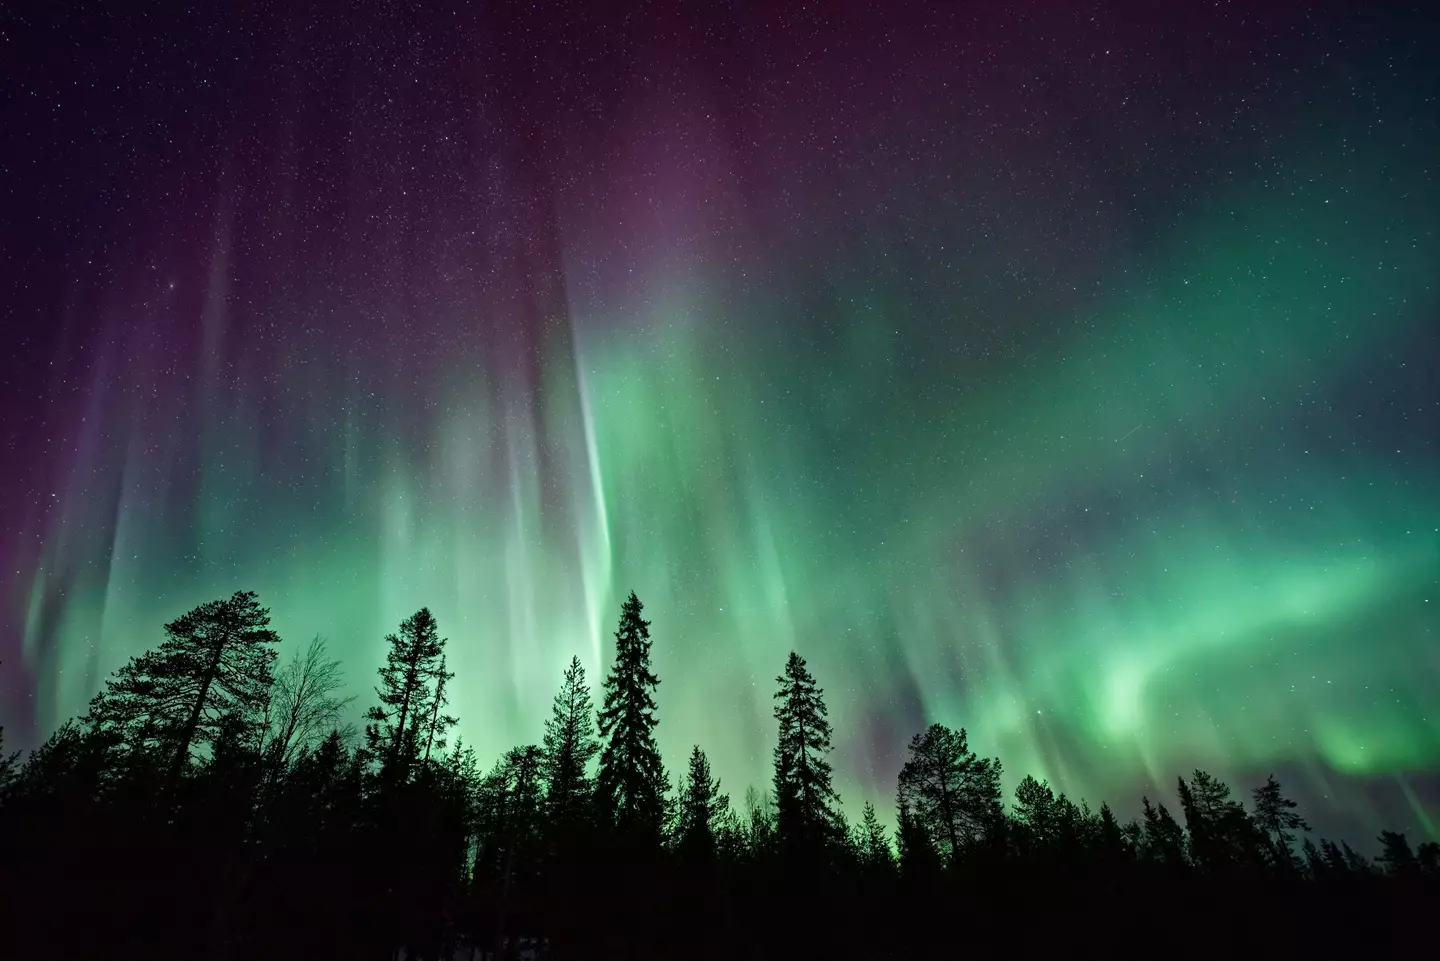 The sound made by Aurora Borealis has fascinated people for centuries.